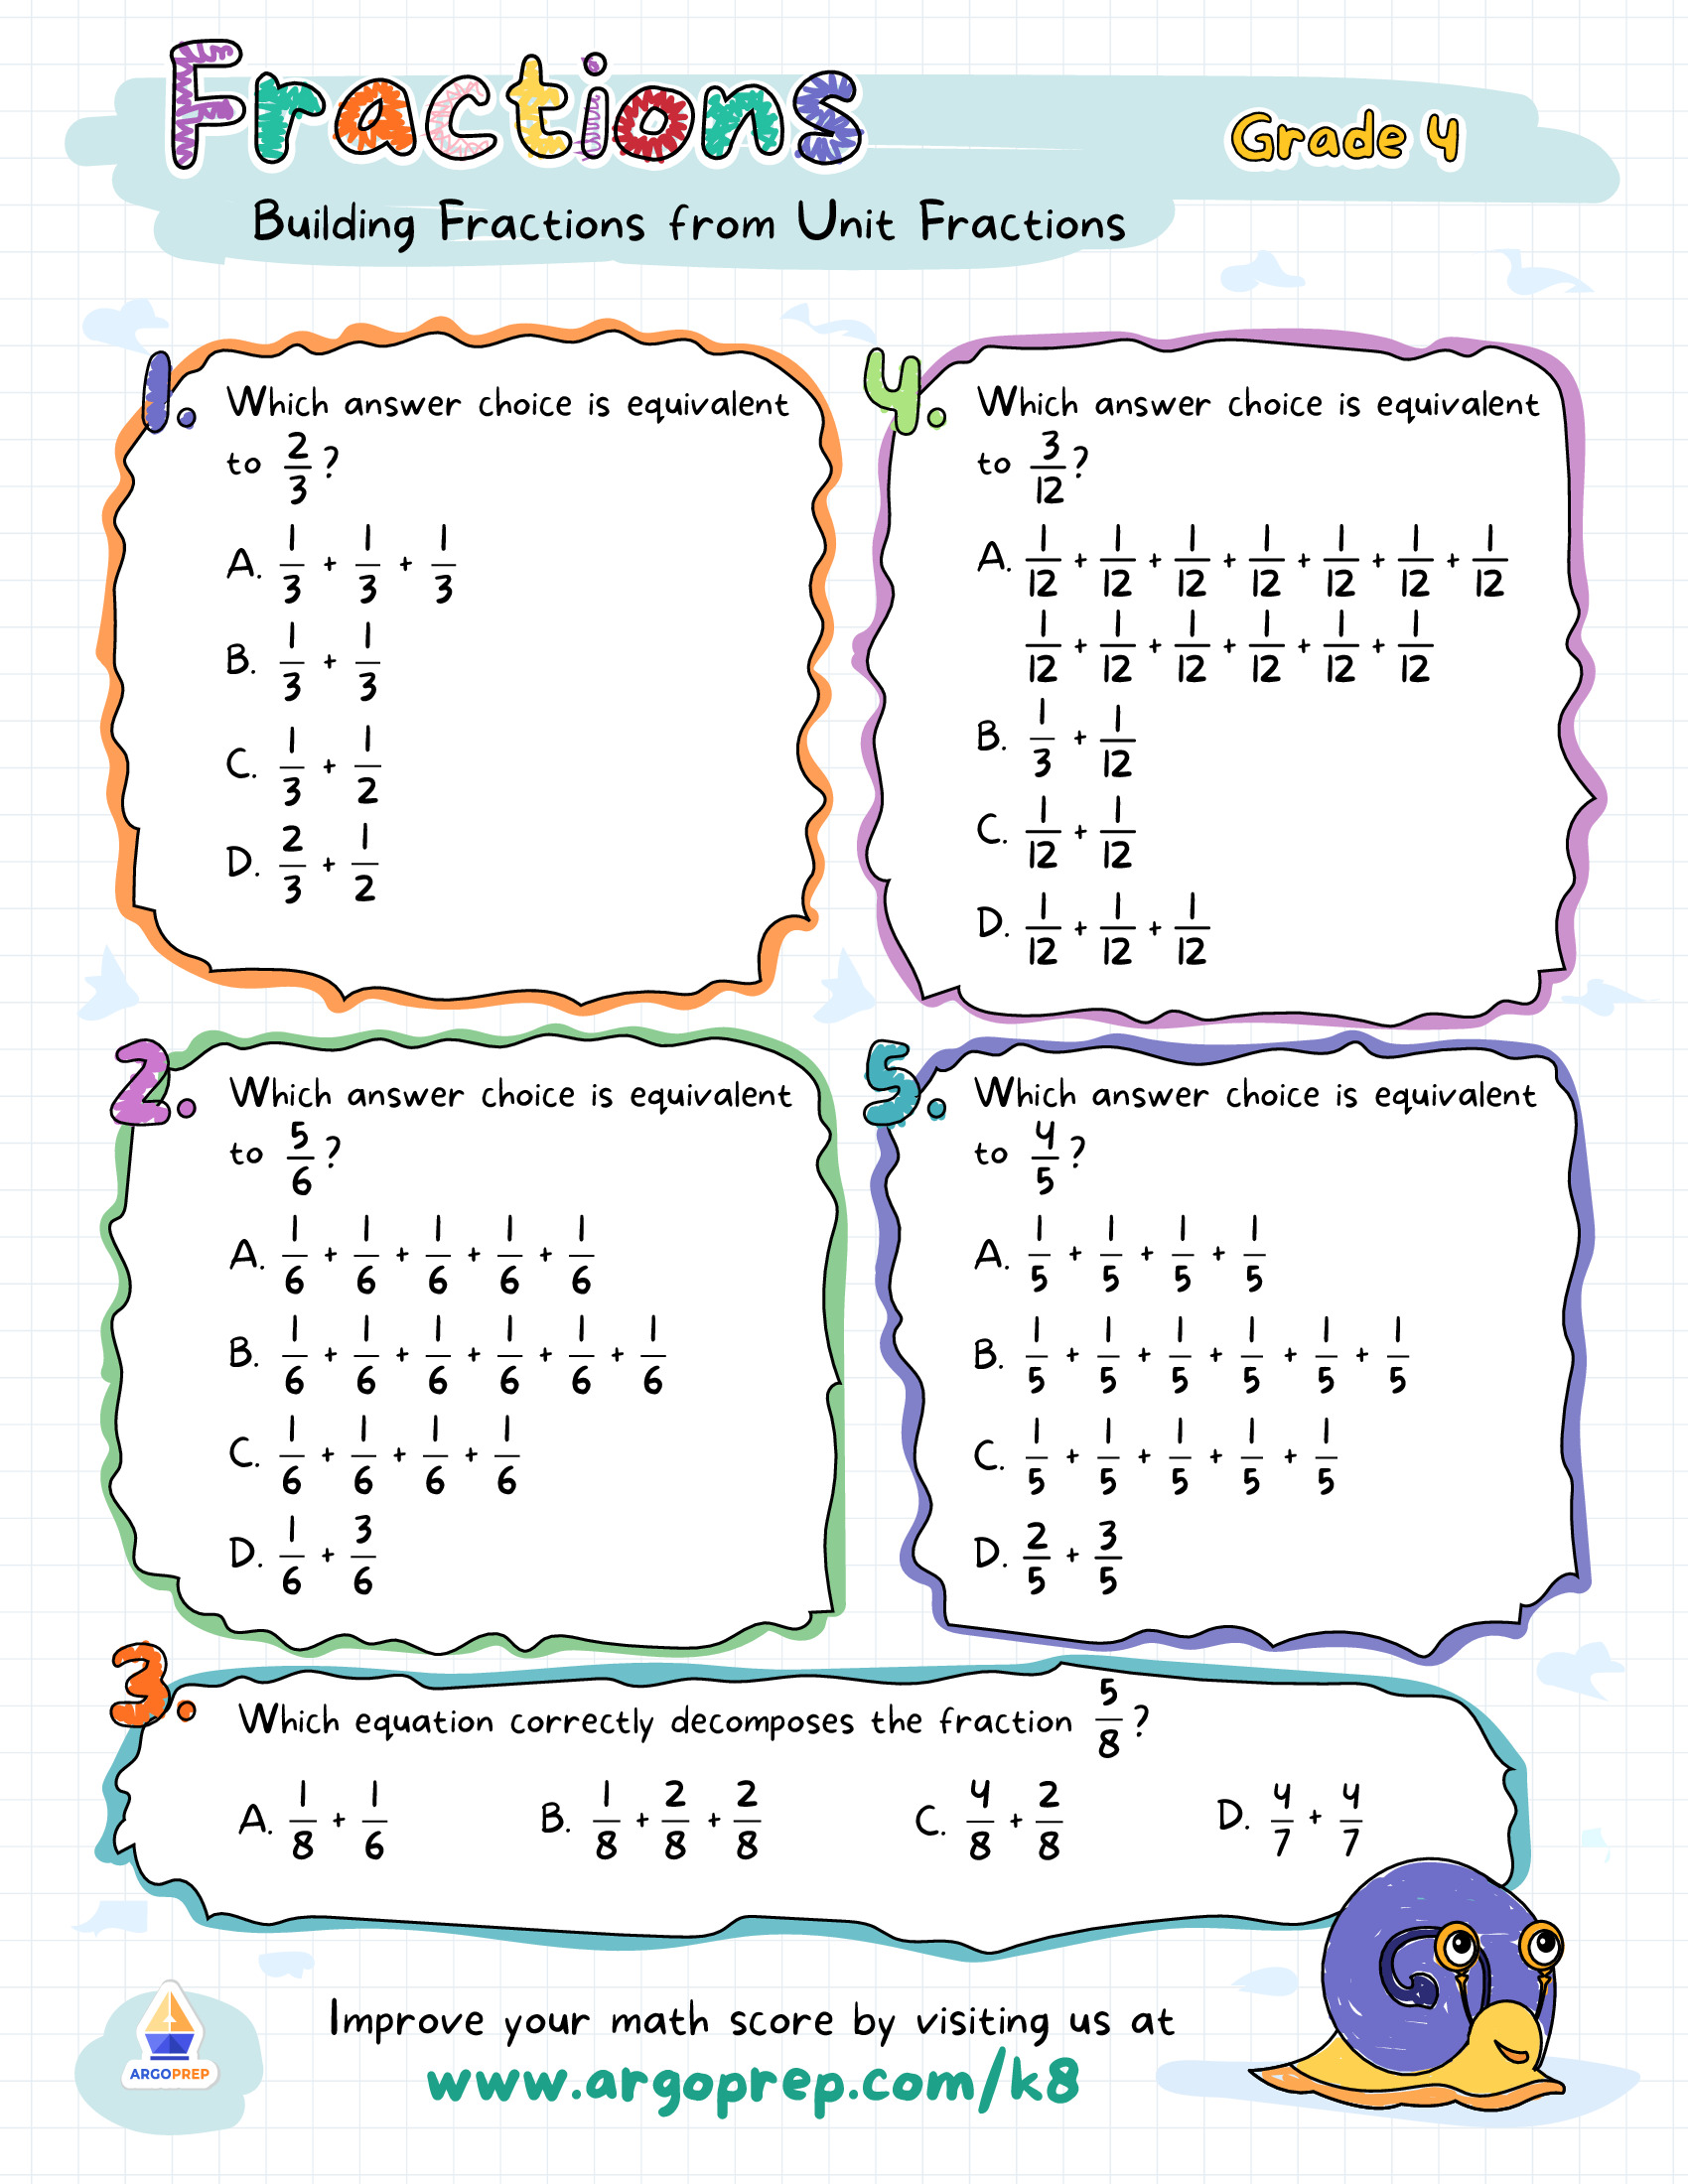 Snail Mail with Fraction Fun - ArgoPrep Within Decomposing Fractions 4th Grade Worksheet